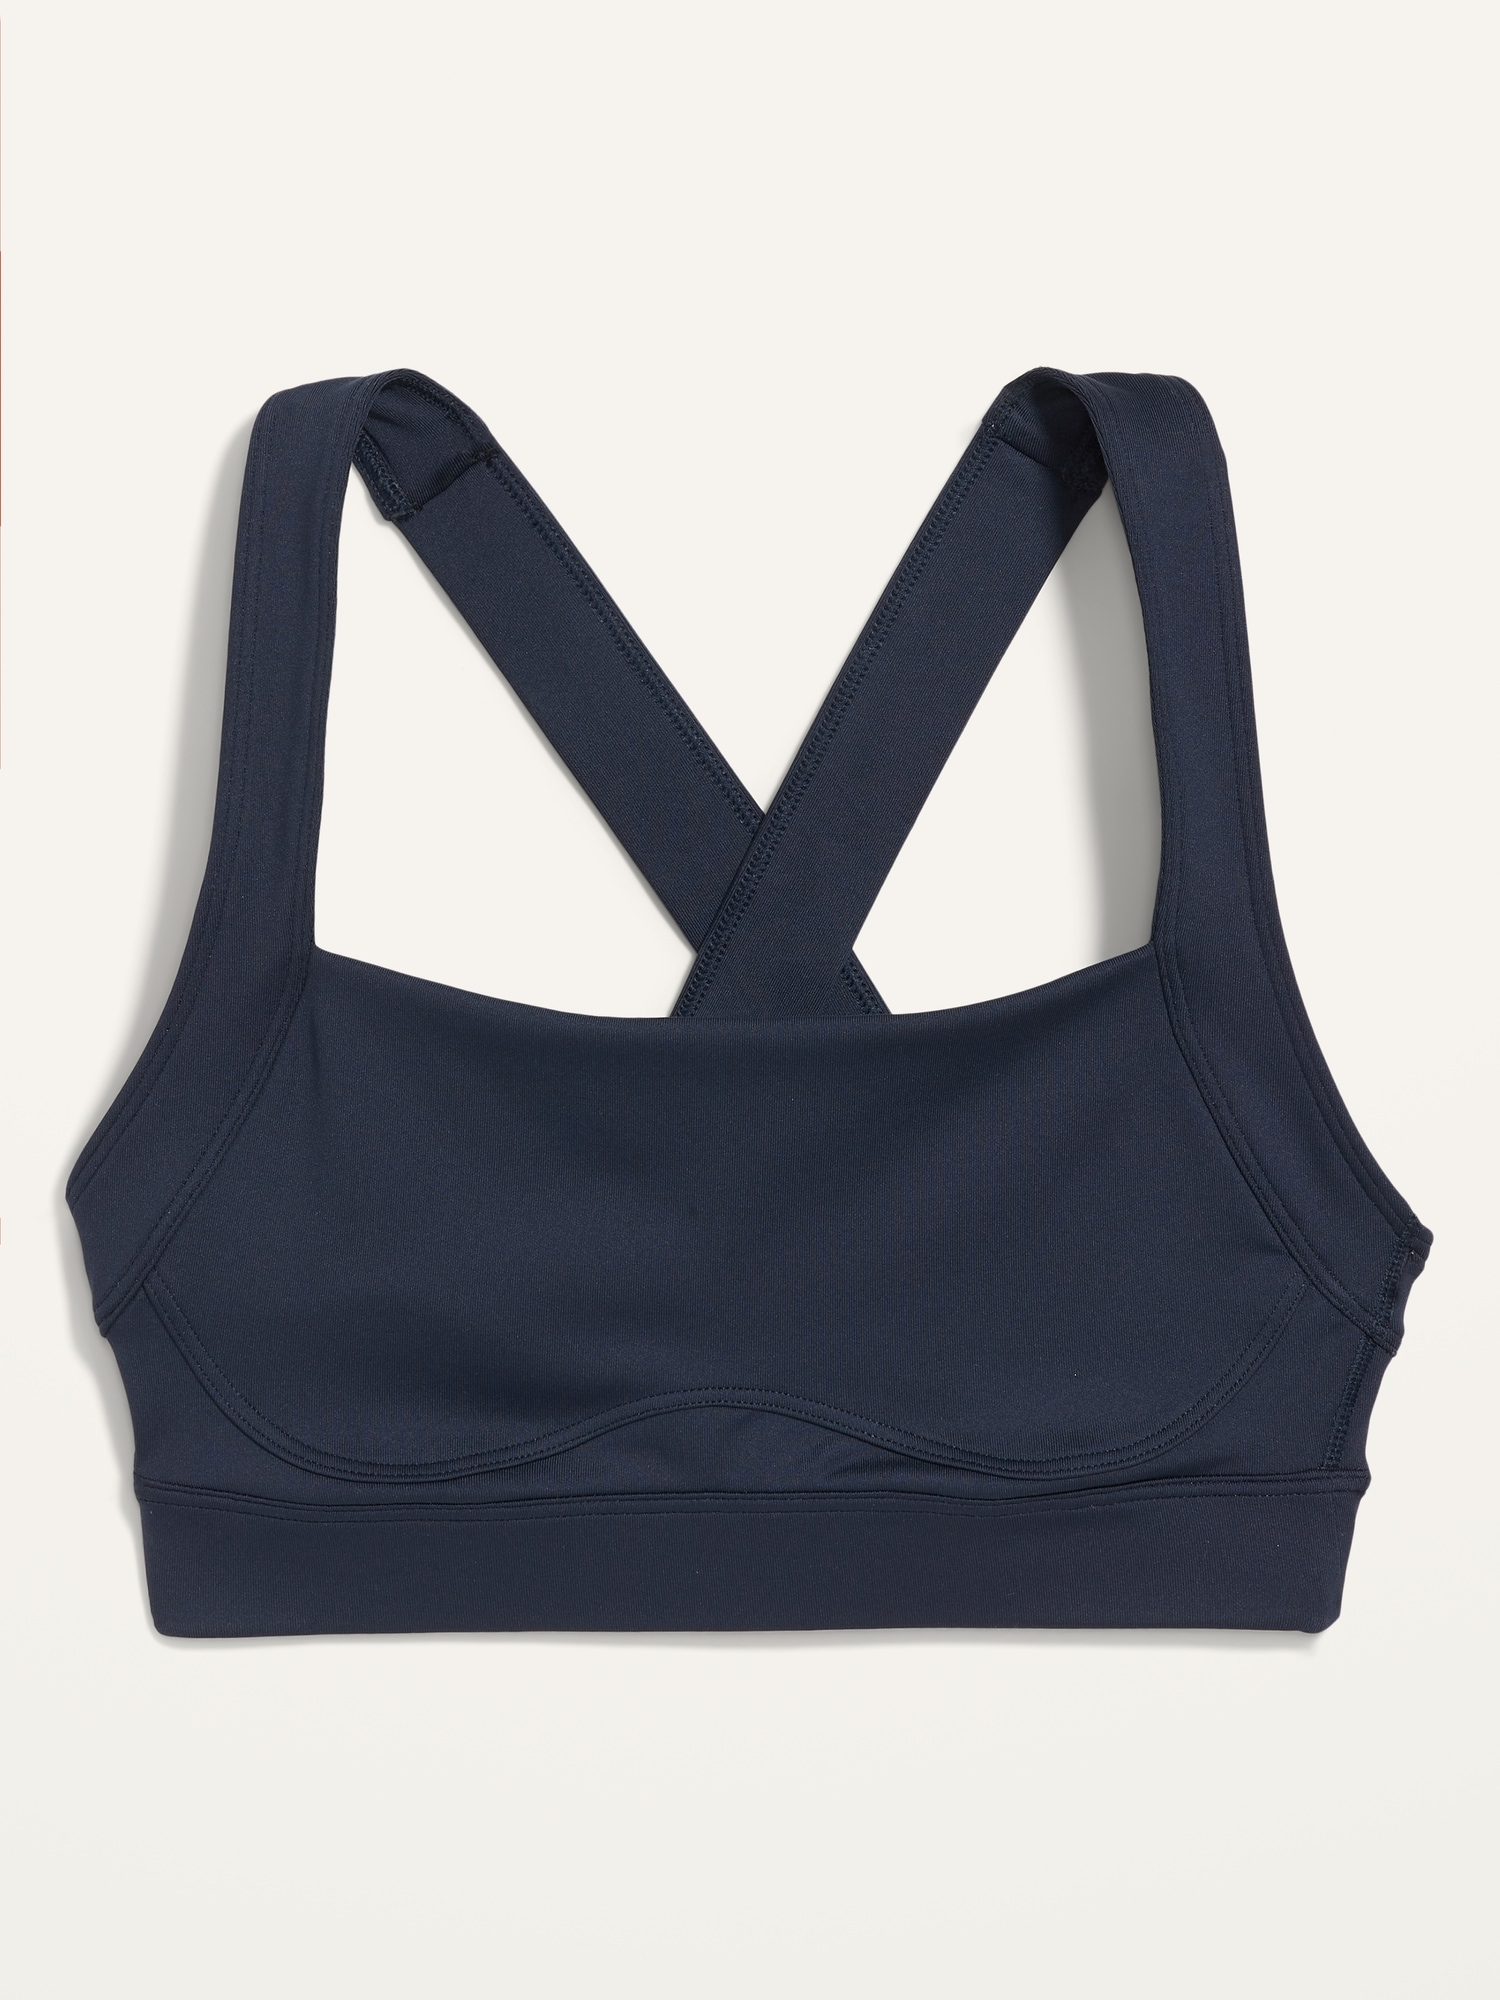 Old Navy - High Support Racerback Sports Bra for Women 2X-4X black